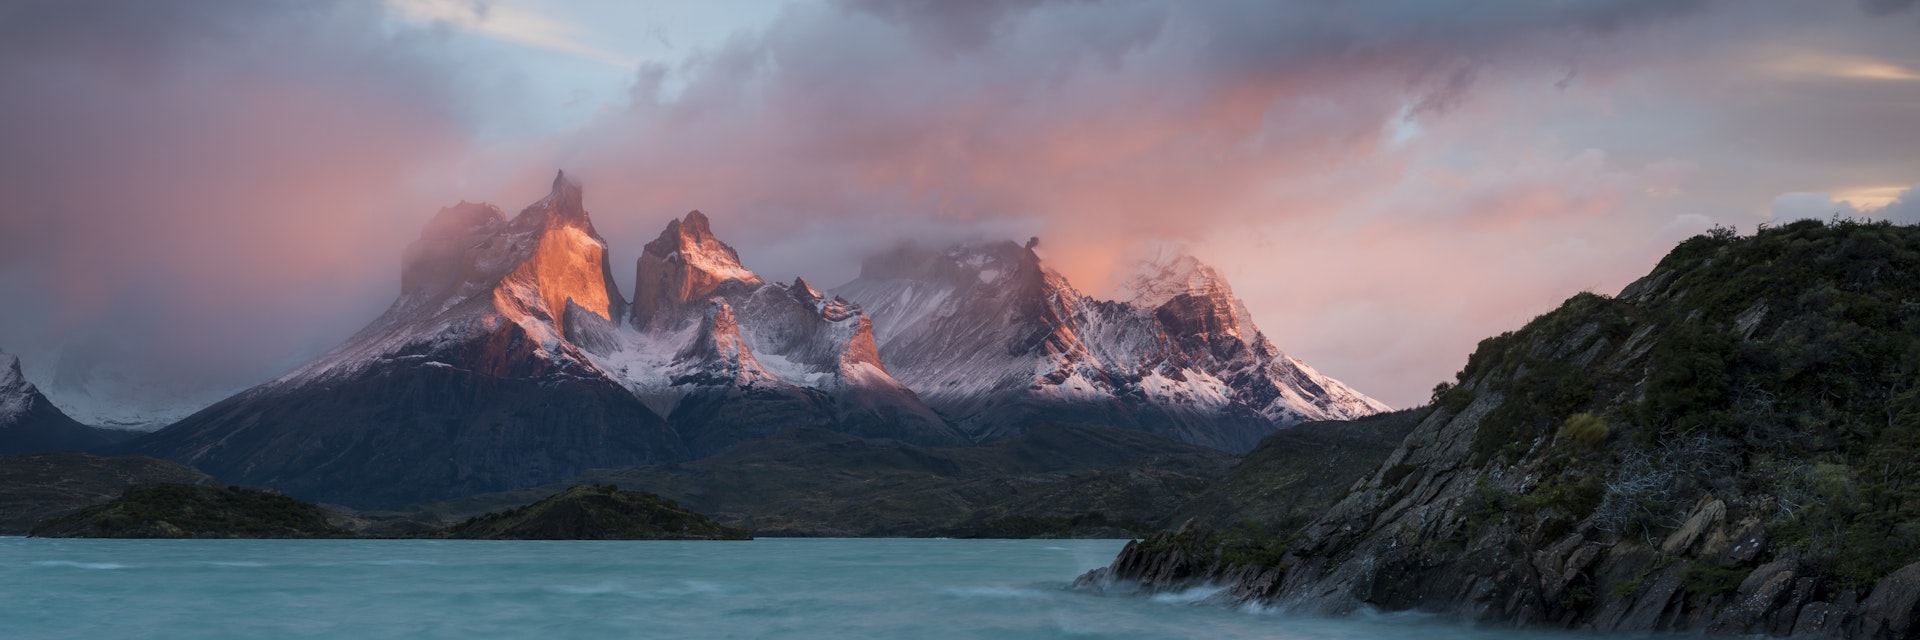 Dawn over Lago Pehoe, Torres del Paine National Park, Patagonia, Chile